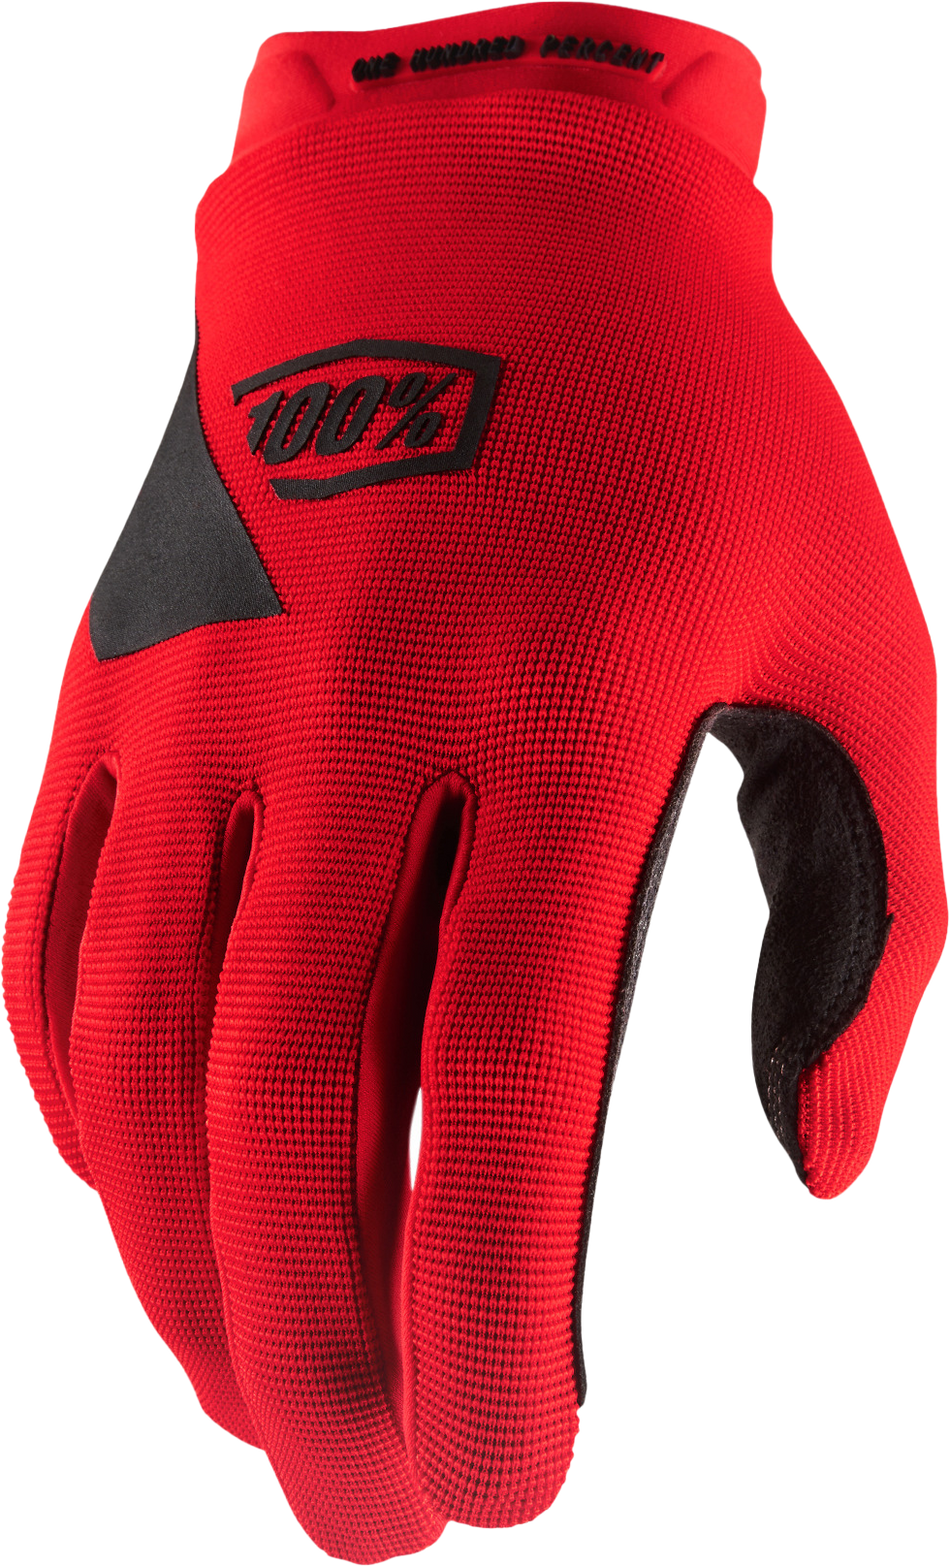 100% Ridecamp Gloves Red Md 10011-00021